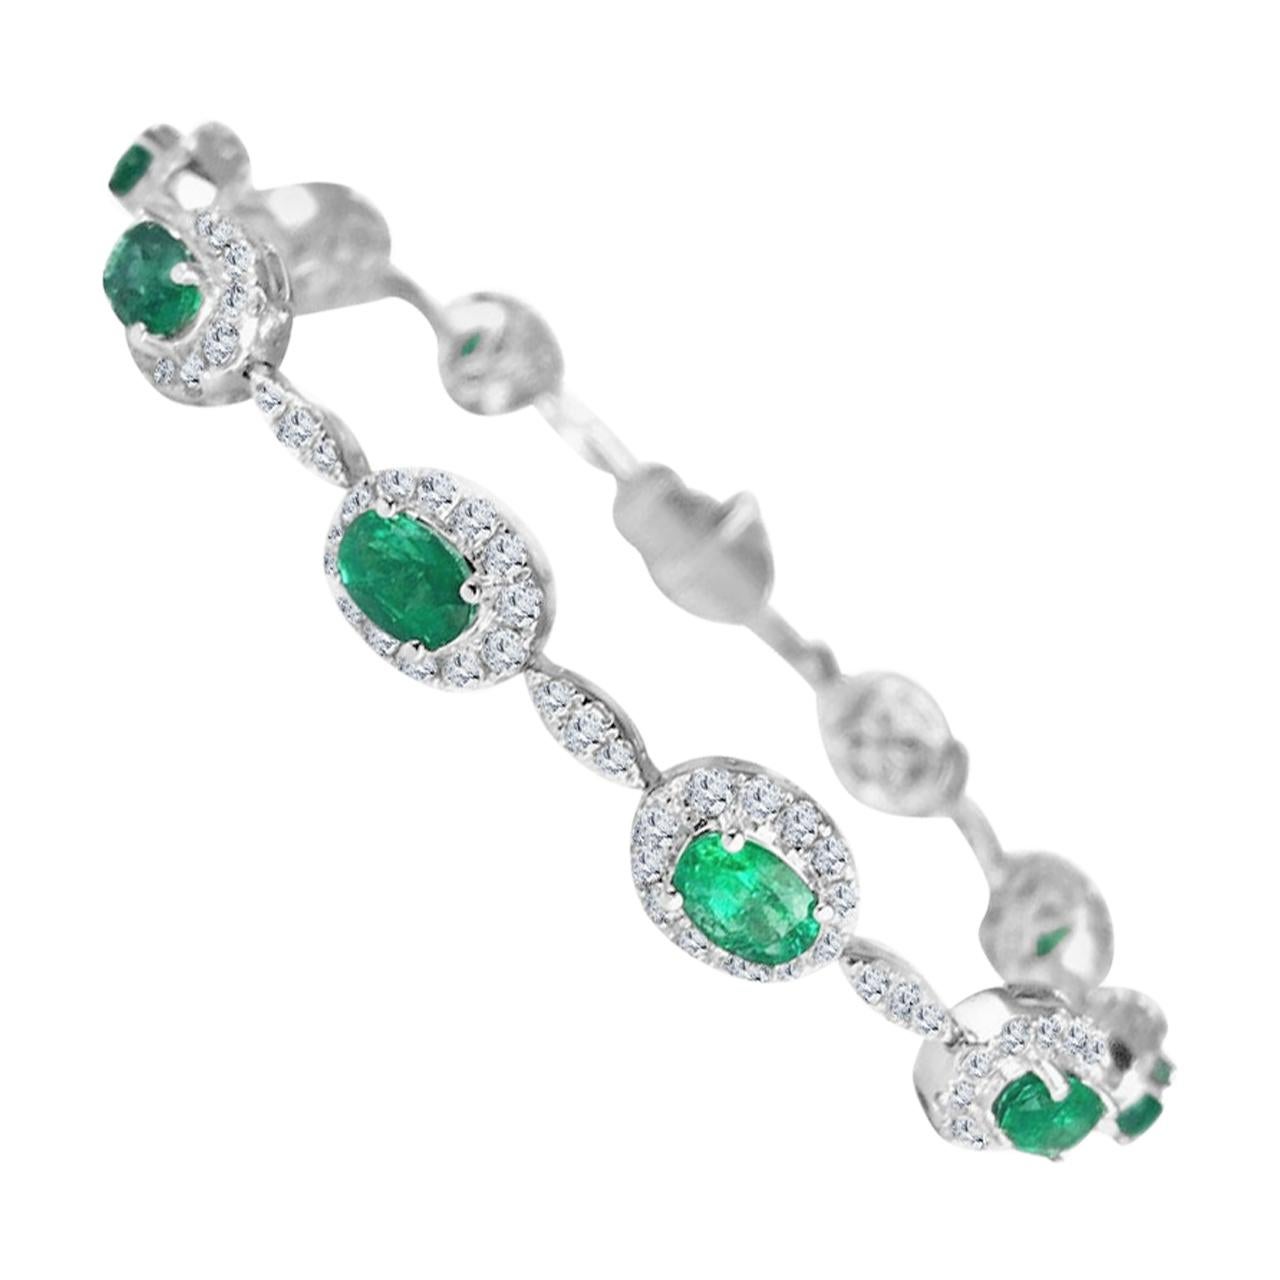 Elegantly showcasing the radiance of 11 oval-cut emeralds, each graced by a halo of round natural diamonds, this bracelet alternates these gem-encrusted links with trios of natural diamonds, artfully mimicking the allure of a singular marquise-cut